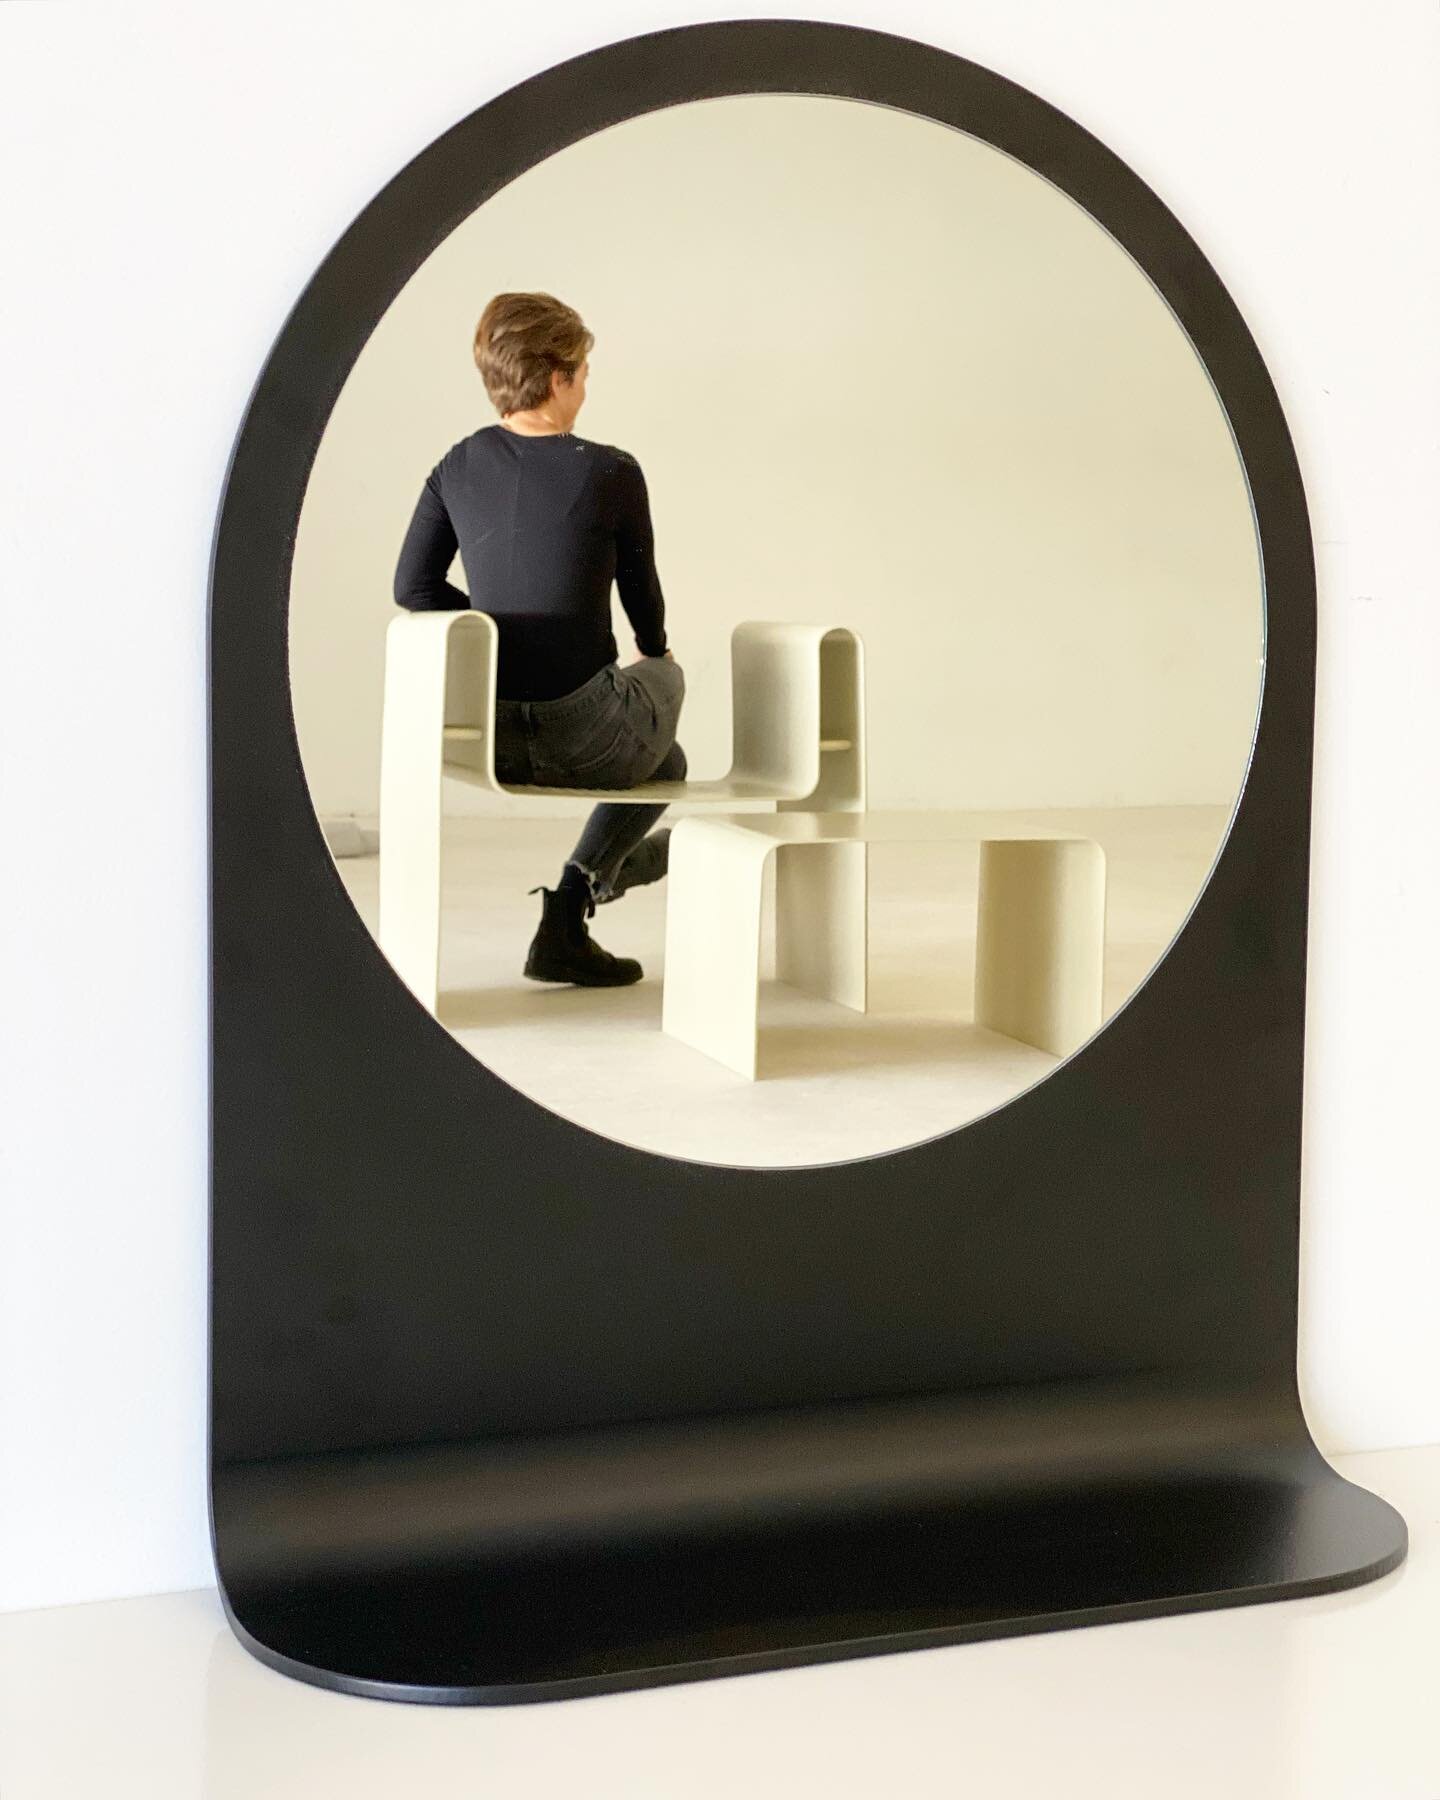 This curvy new O mirror in satin black is part of our new MoNO collection, for all your best views.